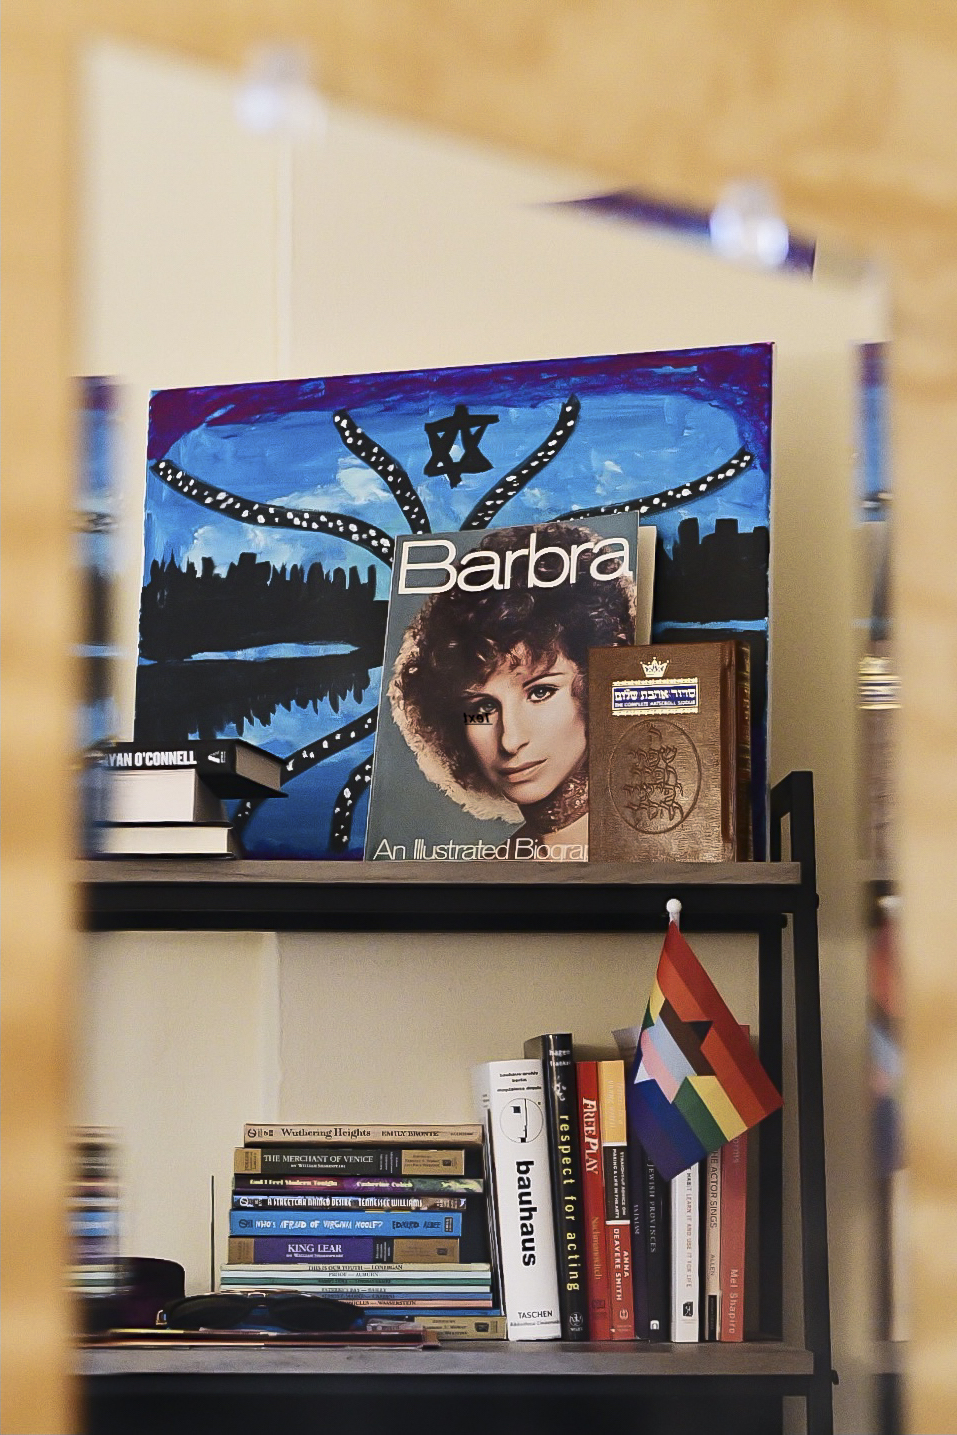 On top a shelf are contemporary Jewish art, a prayer book and an illustrated biography of actor-singer Barbra Streisand.